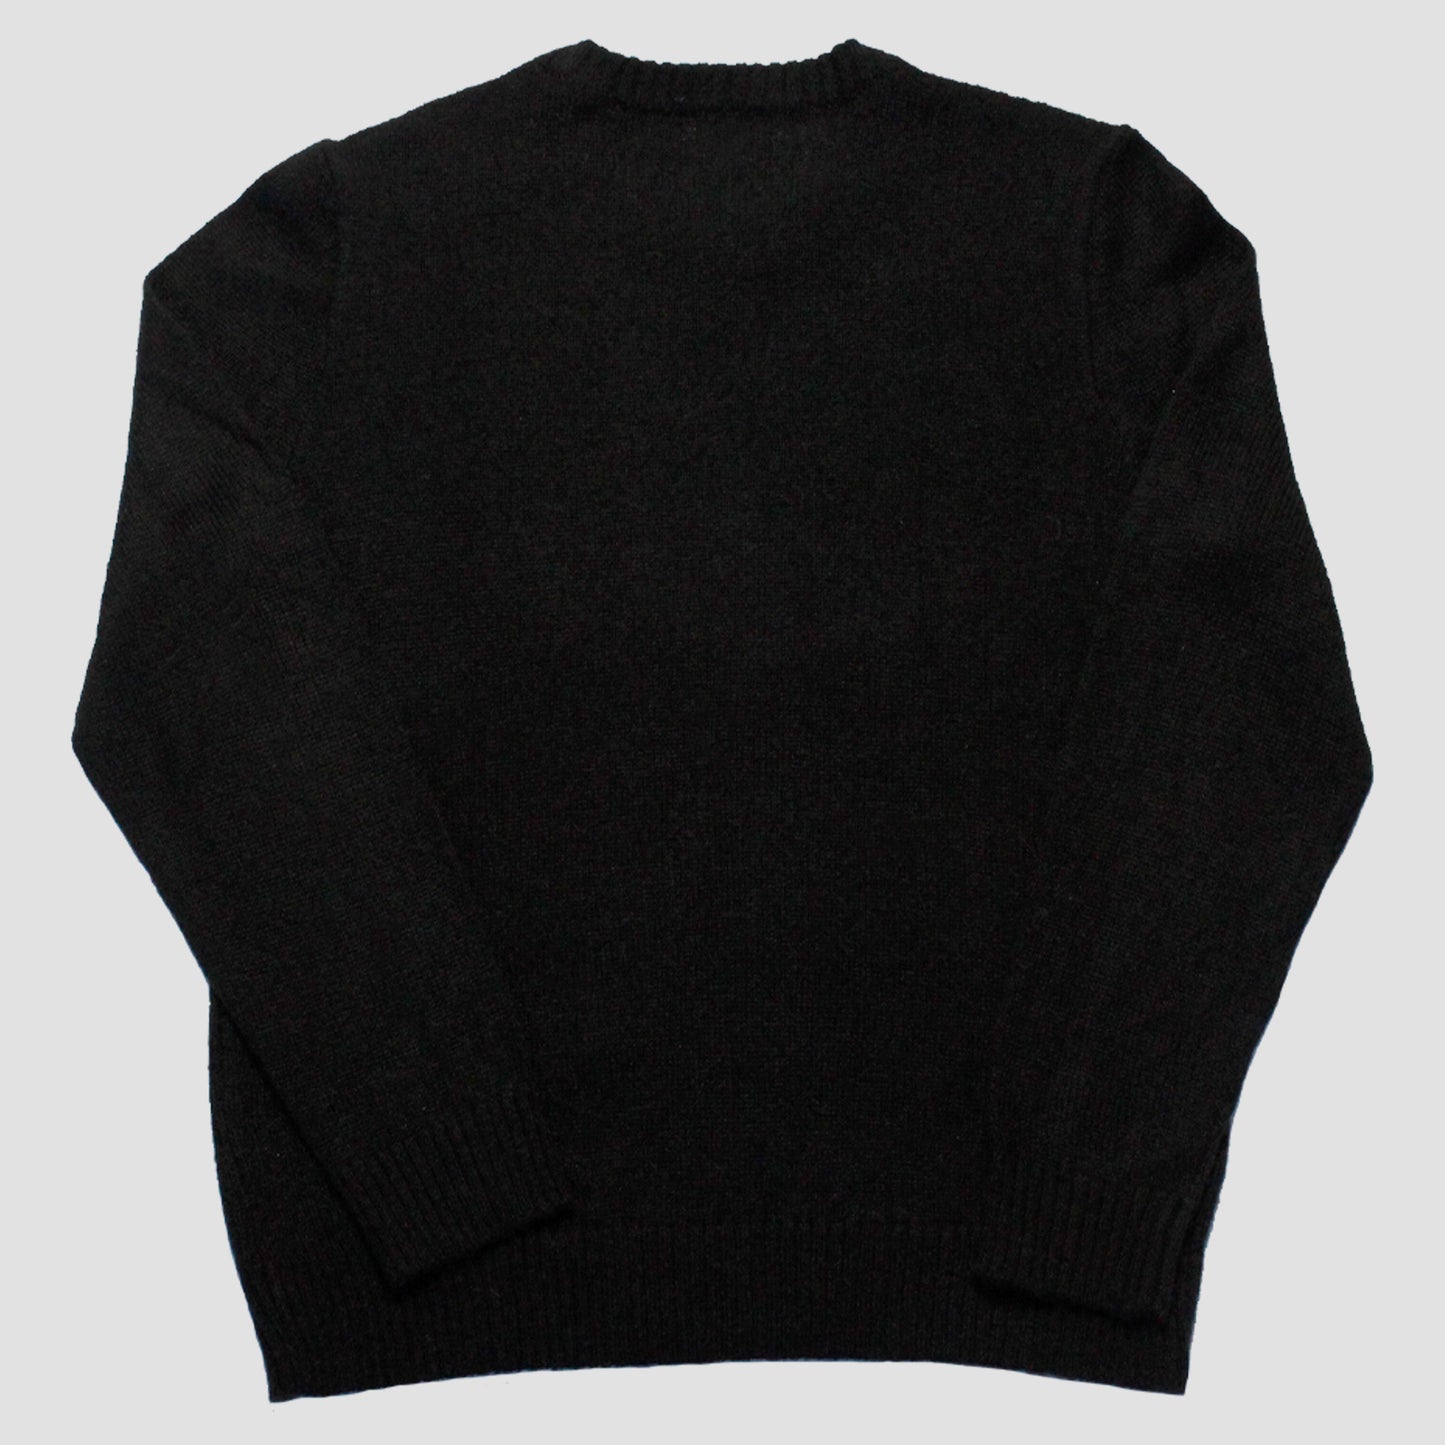 "NO SWITCHBLADES IN HEAVEN" Pullover Knit Sweater (L)